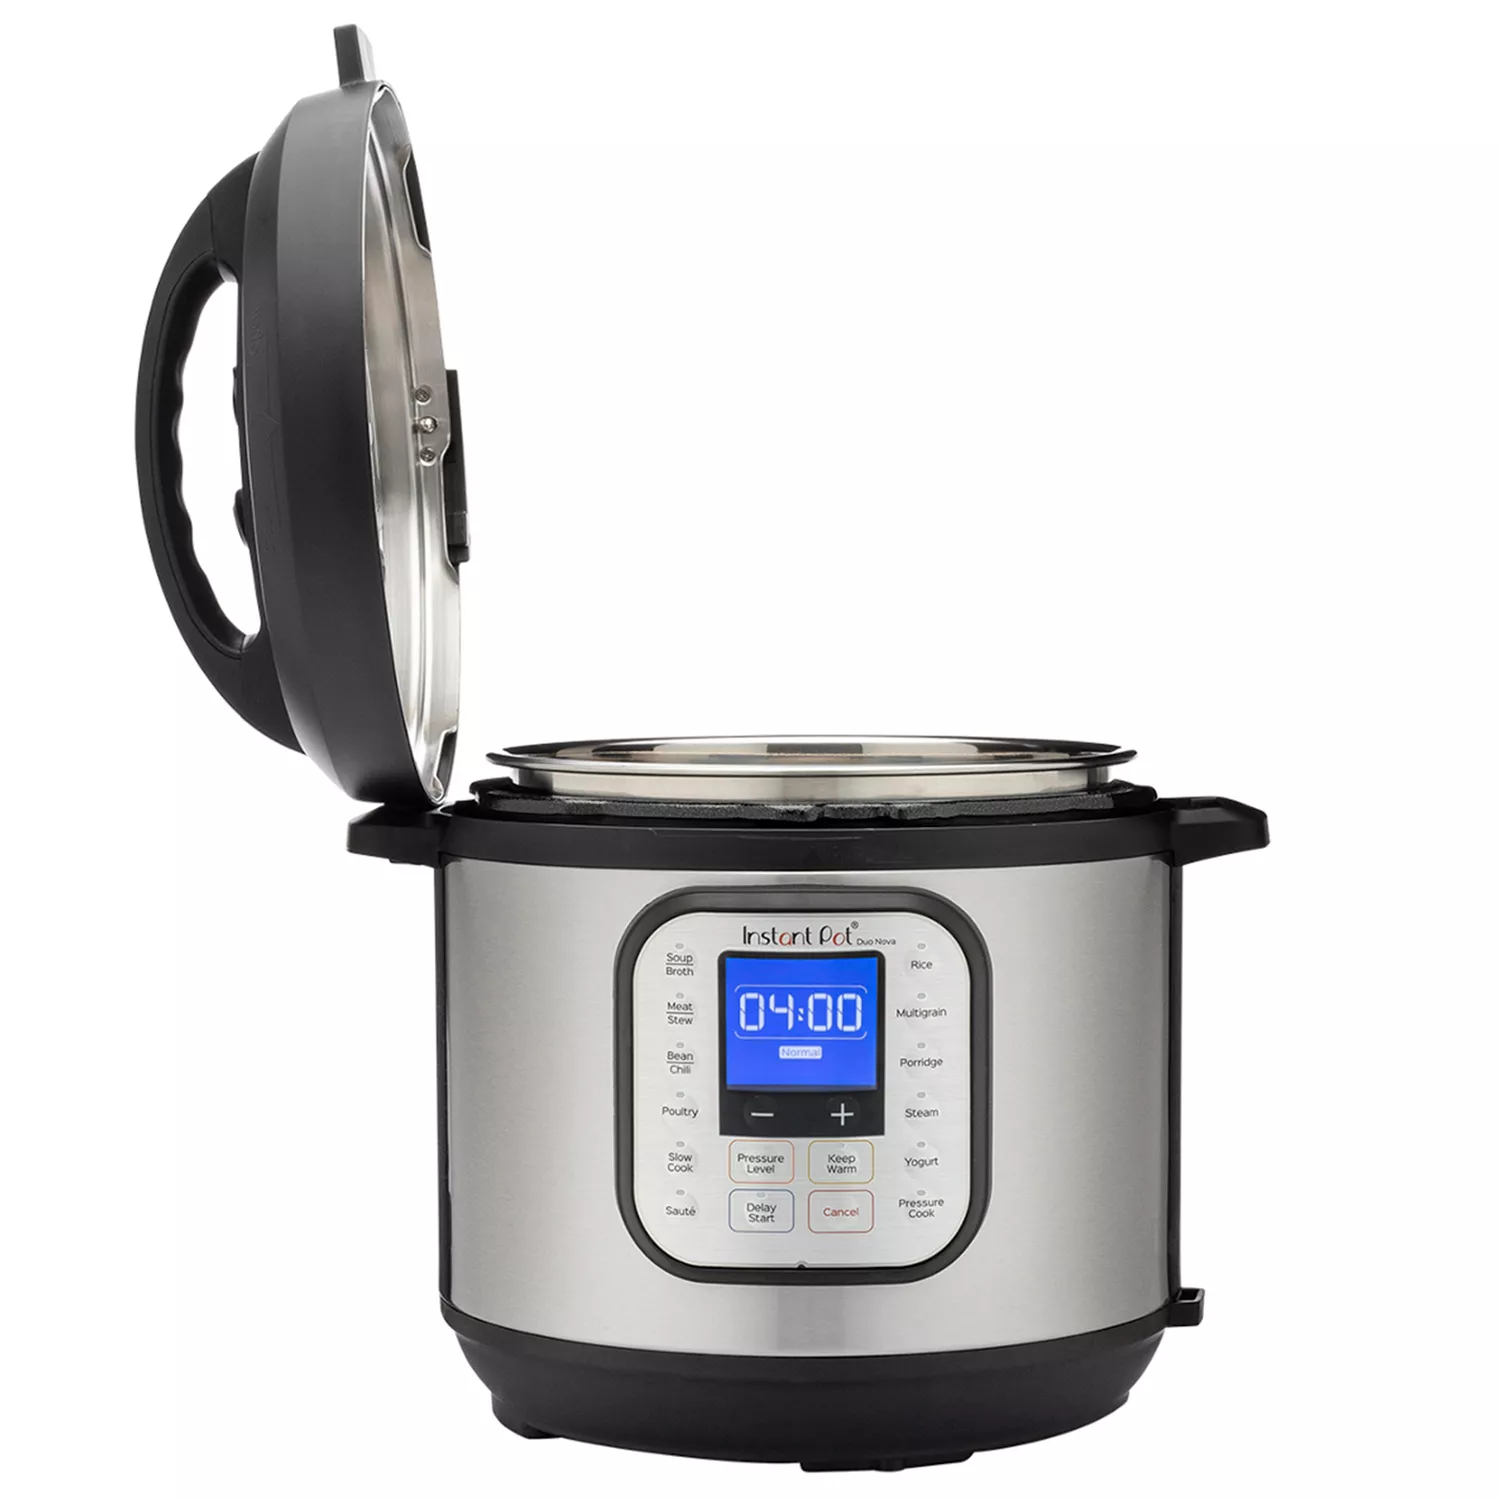 Get an Instant Pot on sale for more than 50% off at Sur La Table right now